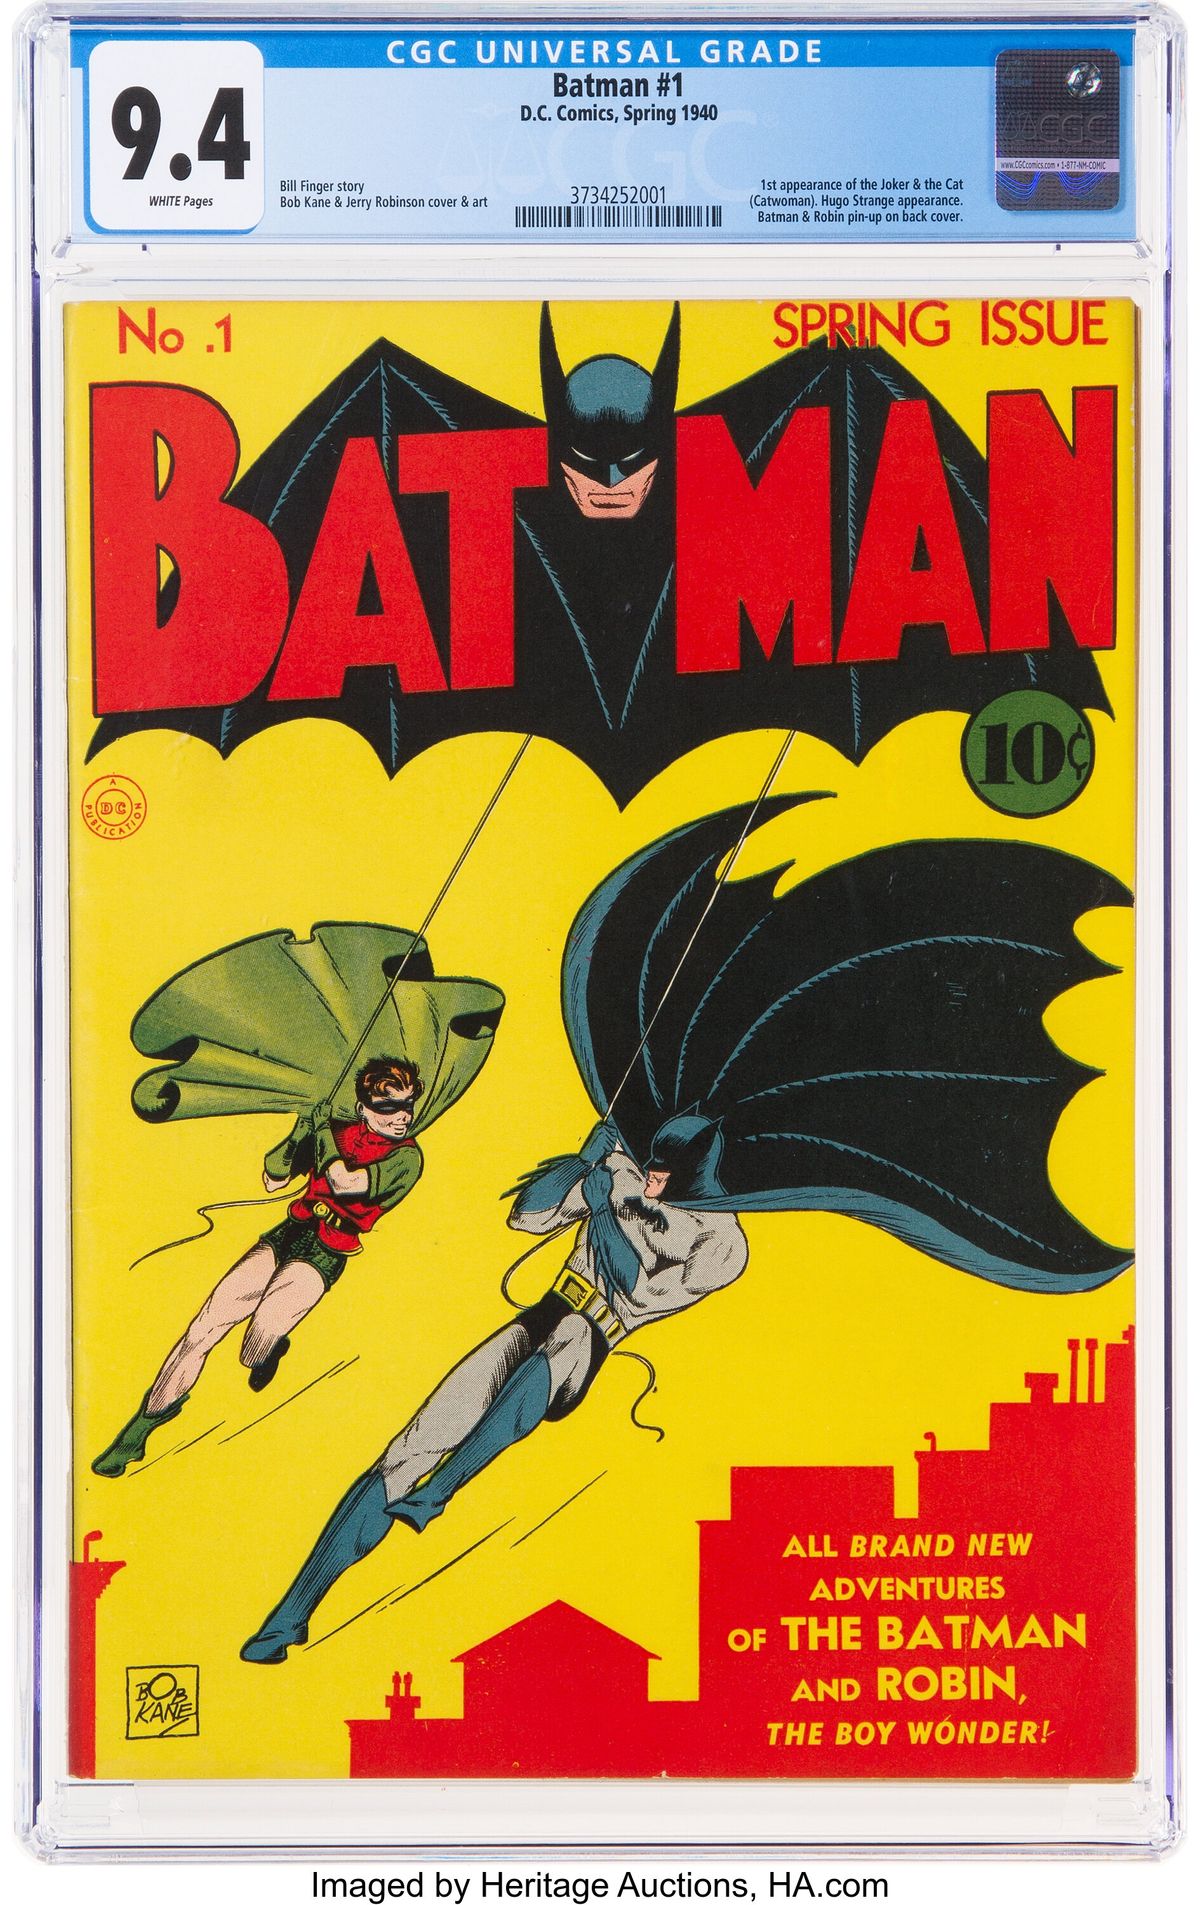 This copy of Batman #1 (1940), written by Bill Finger and drawn by Bob Kane, with art assistance from Jerry Robinson and Sheldon Moldoff, sold for $2.22m at Heritage Auctions 